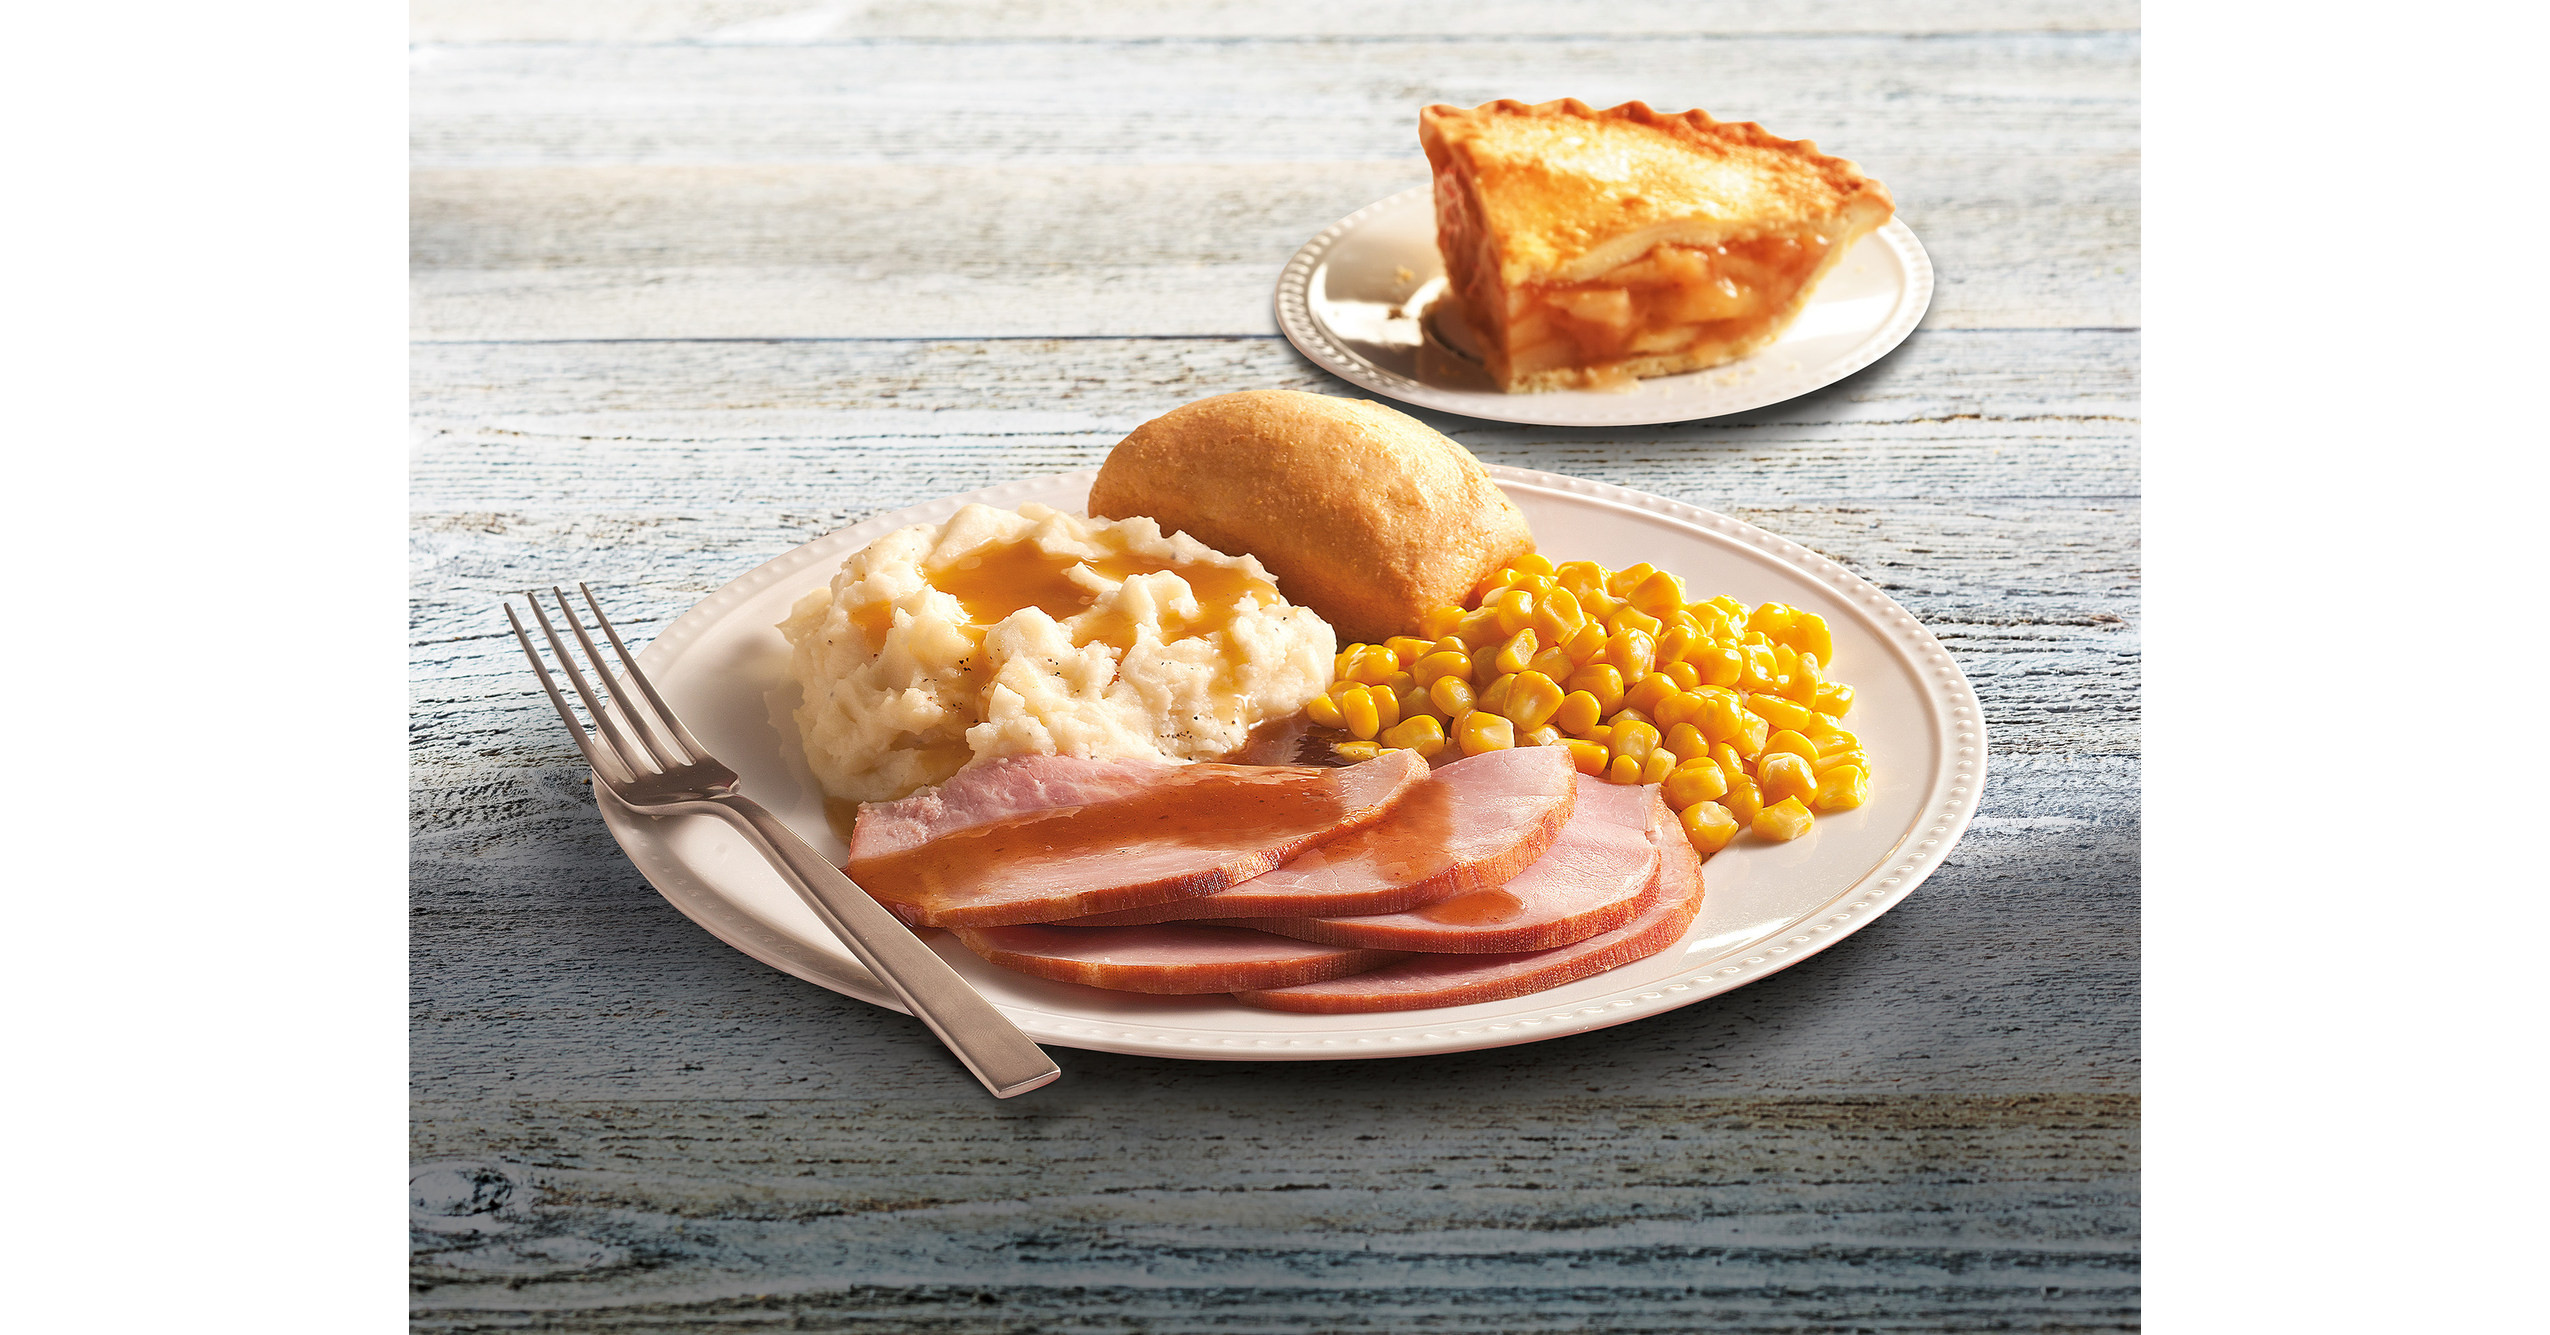 Easter Dinner Boston
 Boston Market Puts Easter Dinner The Table With A Host